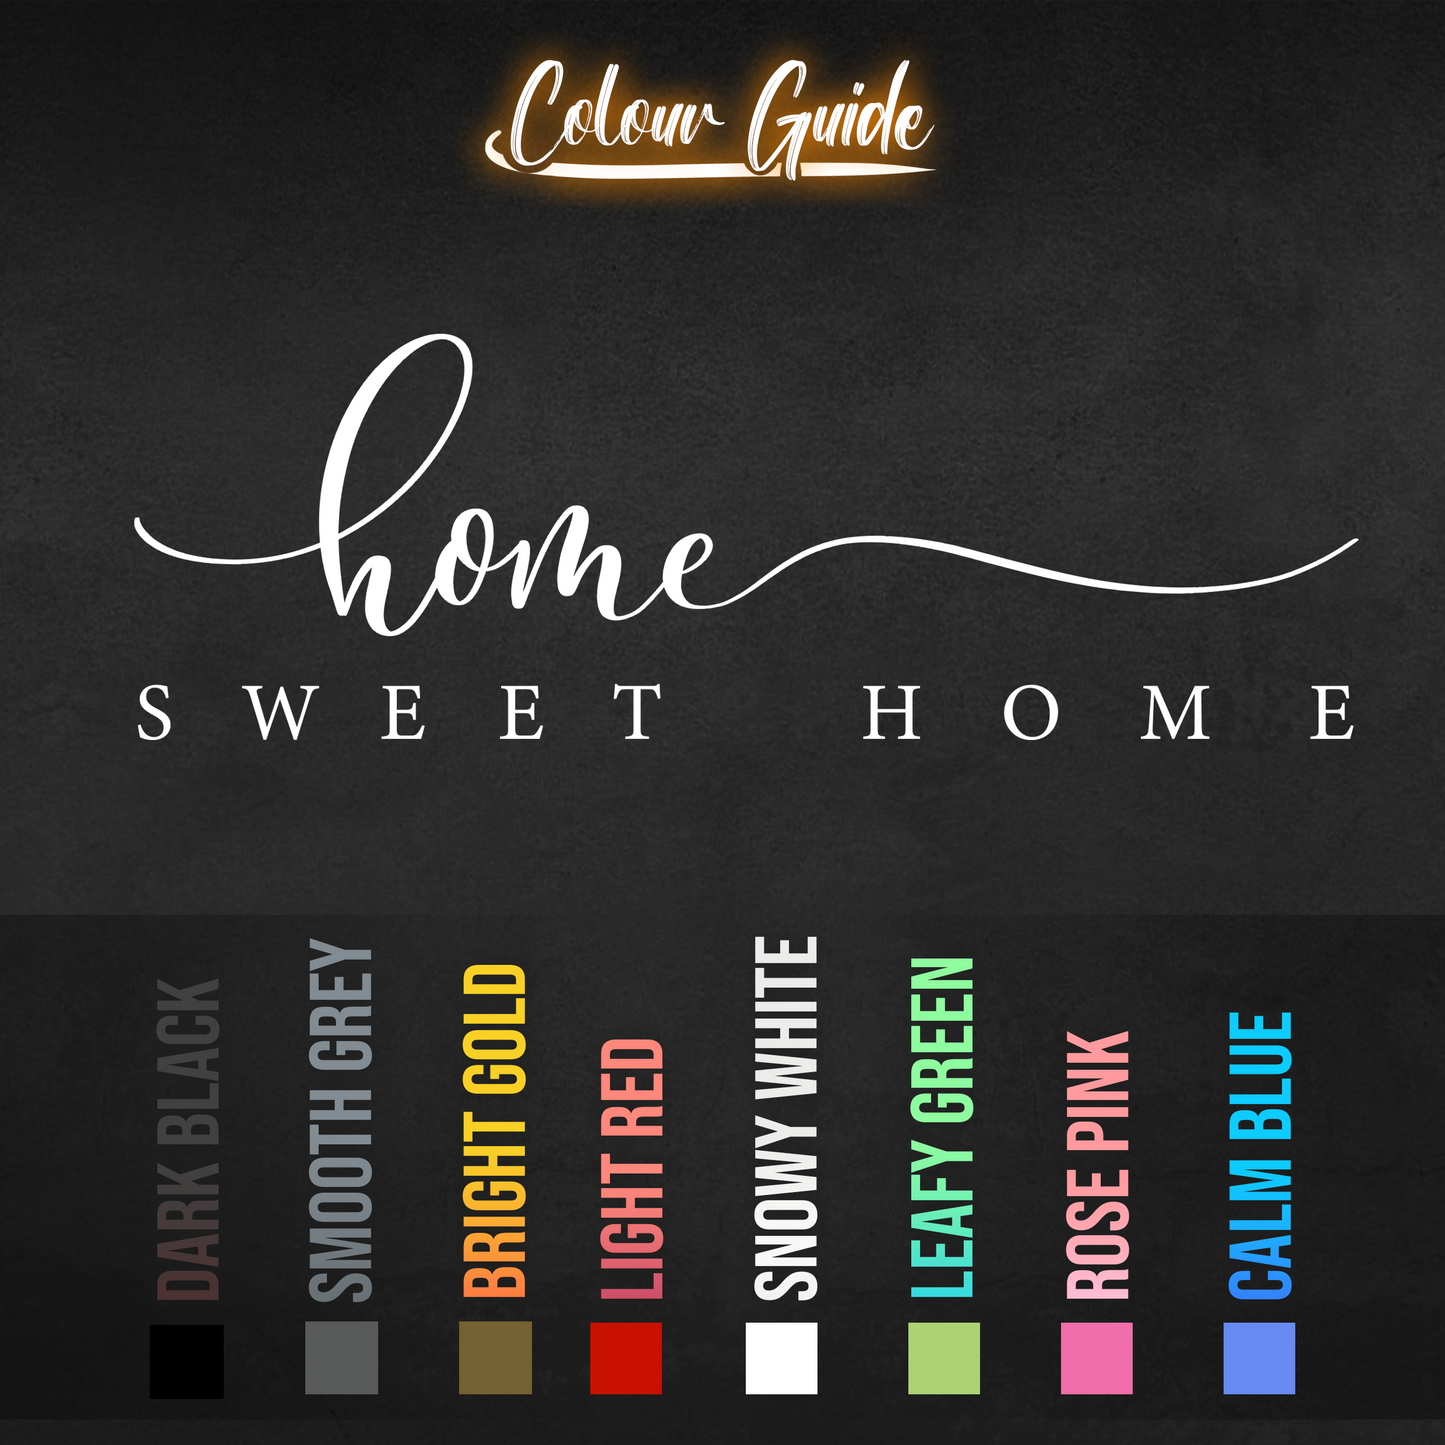 Home Sweet Home Wall Sticker Decal